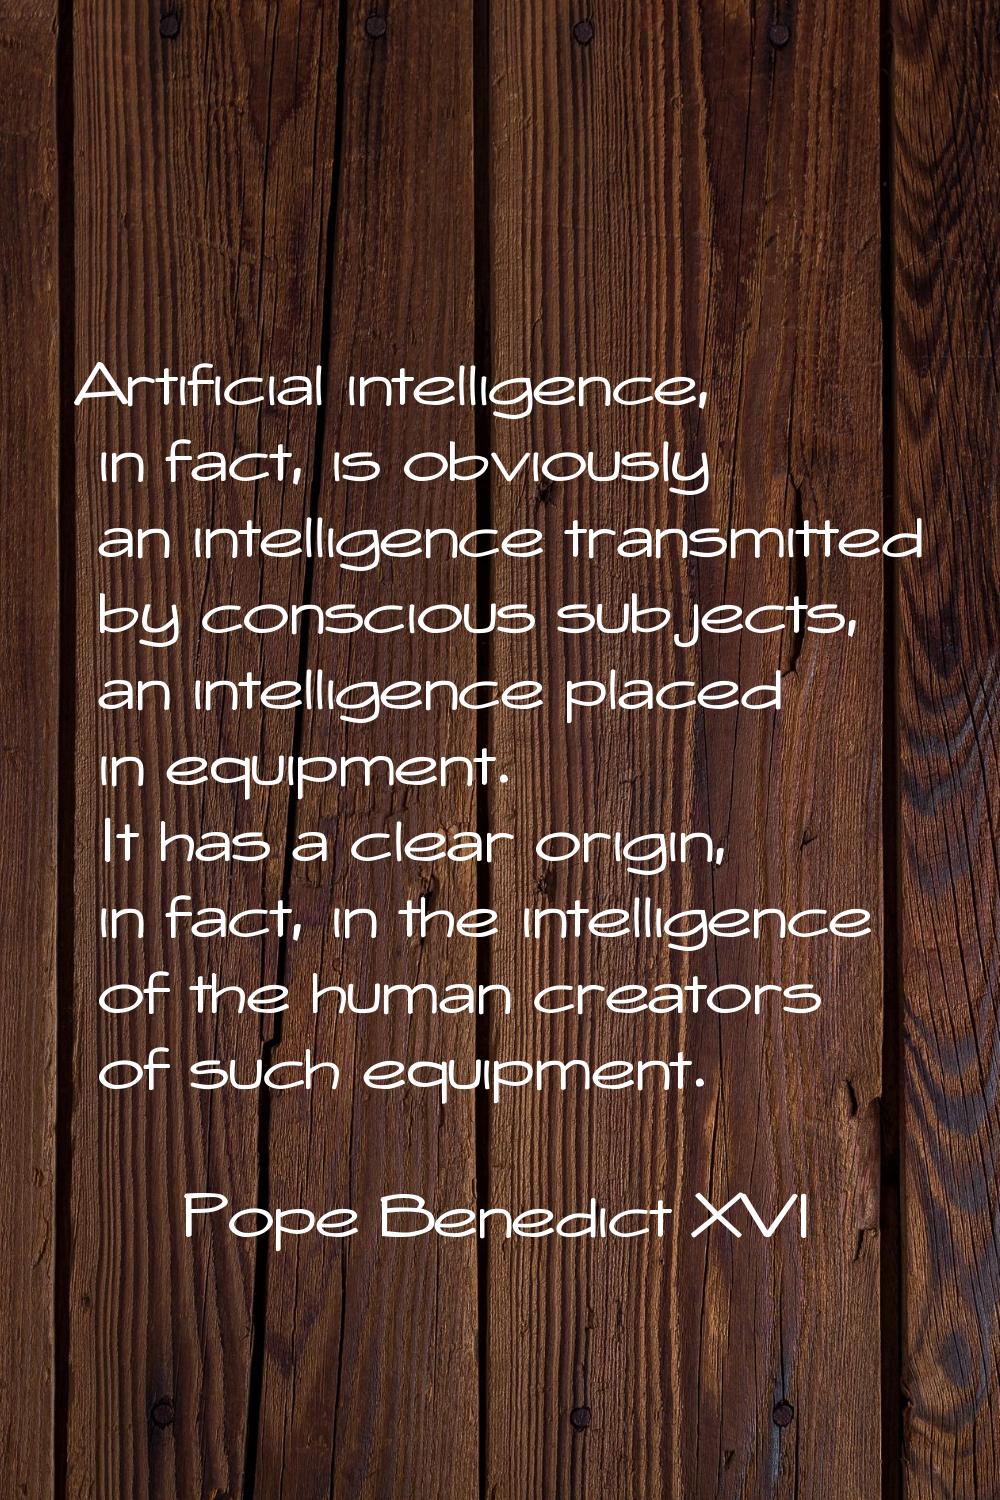 Artificial intelligence, in fact, is obviously an intelligence transmitted by conscious subjects, a